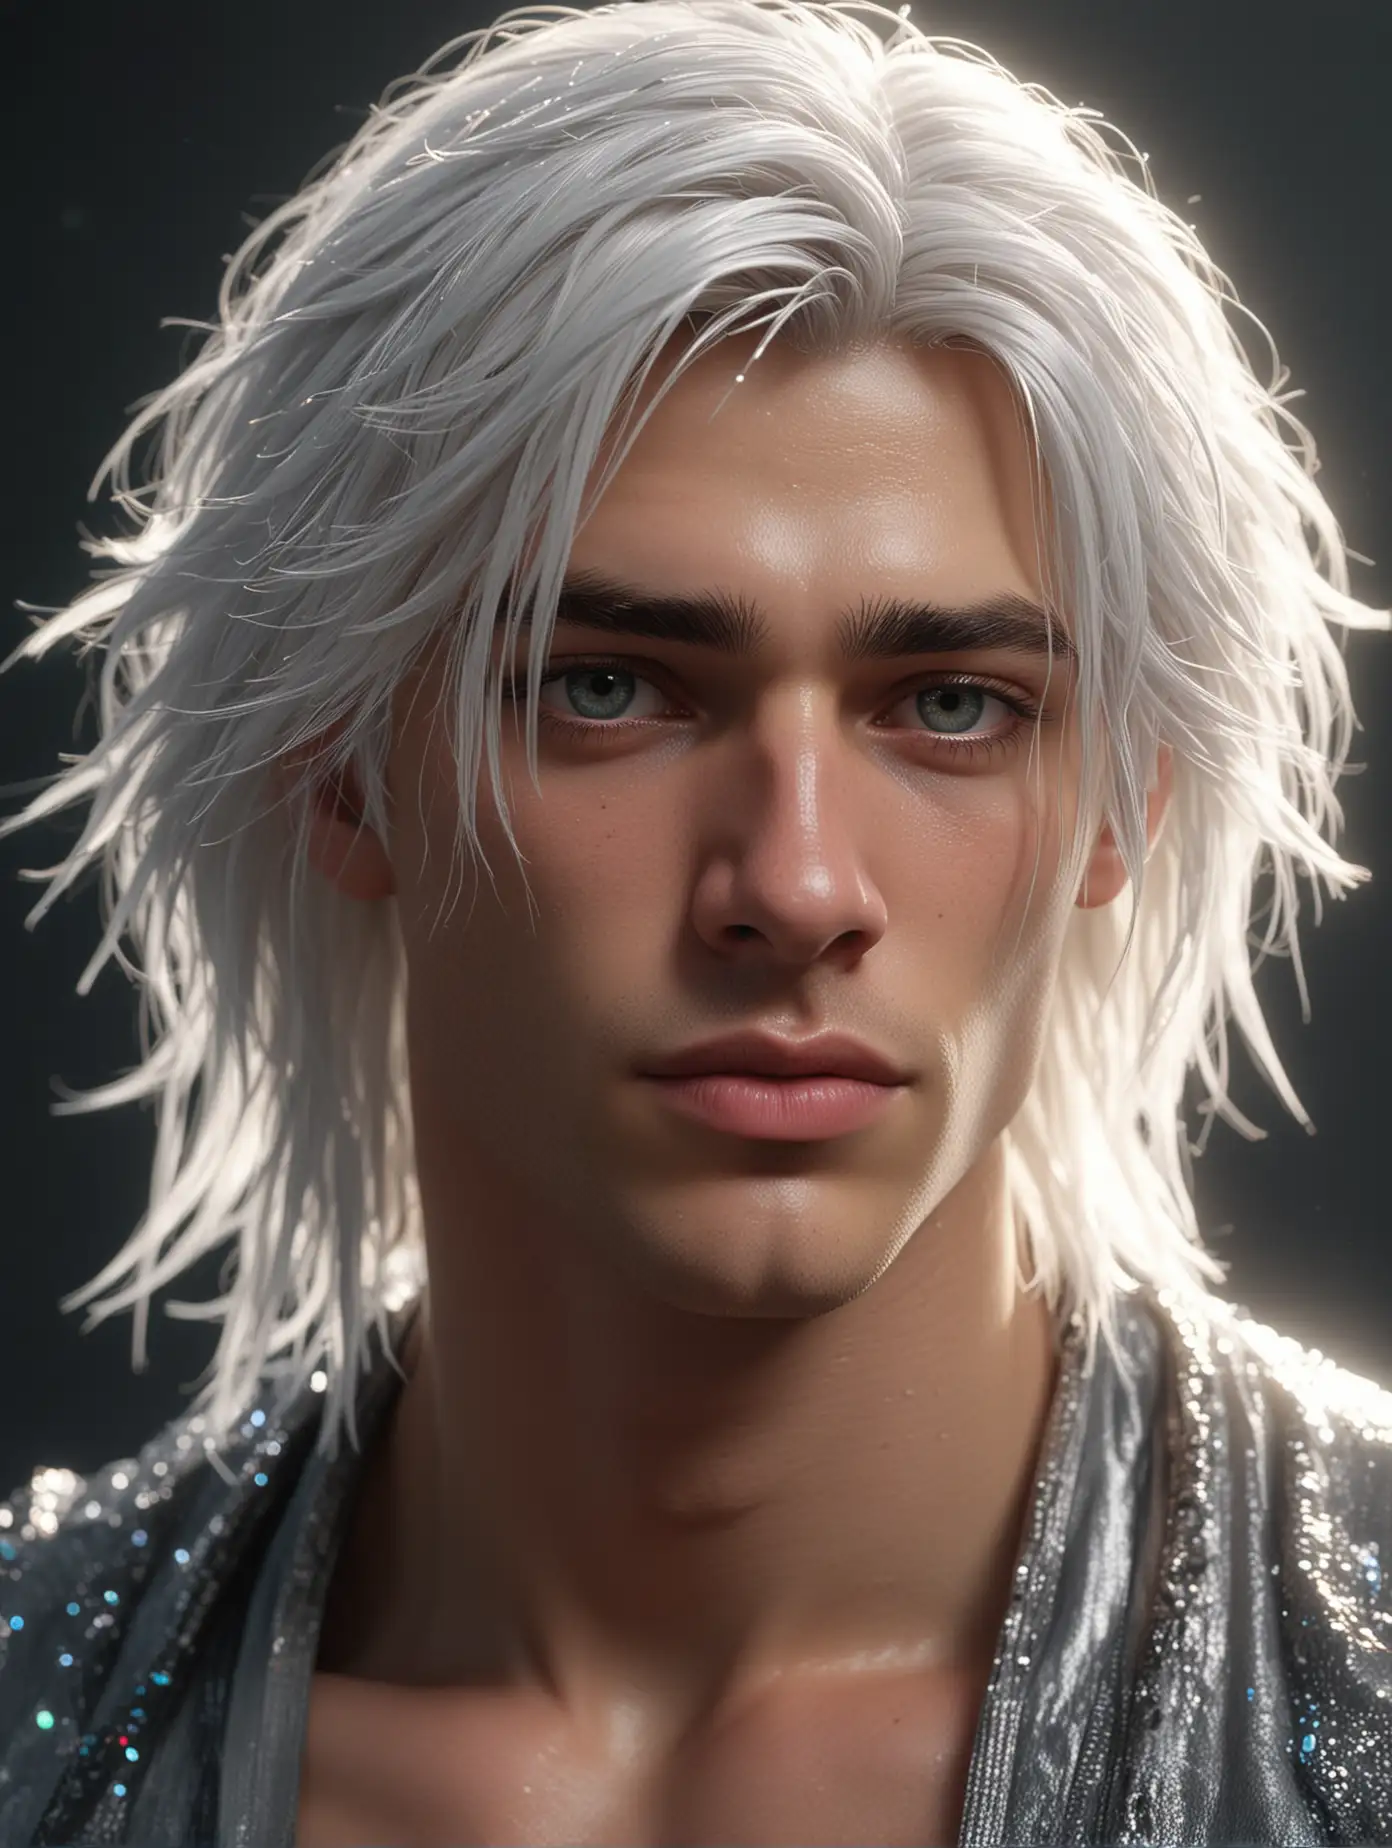 very hot handsome teen. broad shoulders. with long white hair with black on the ends. slightly curly. pale skin. muscular figure. bad boy demeanor. cute boy. Ultra high definition. light particles. glowing hair. cinematic lighting and cinematic shading. very long tongue. very baroque and infinitesimally individualized. fanatically pragmatic 3d blender sfm compositions. holographic. very intricately and microscopically detailed. ultra realistic 3d blender sfm textures. upscaled definition. cinematic lighting. dressed in wet attire. 